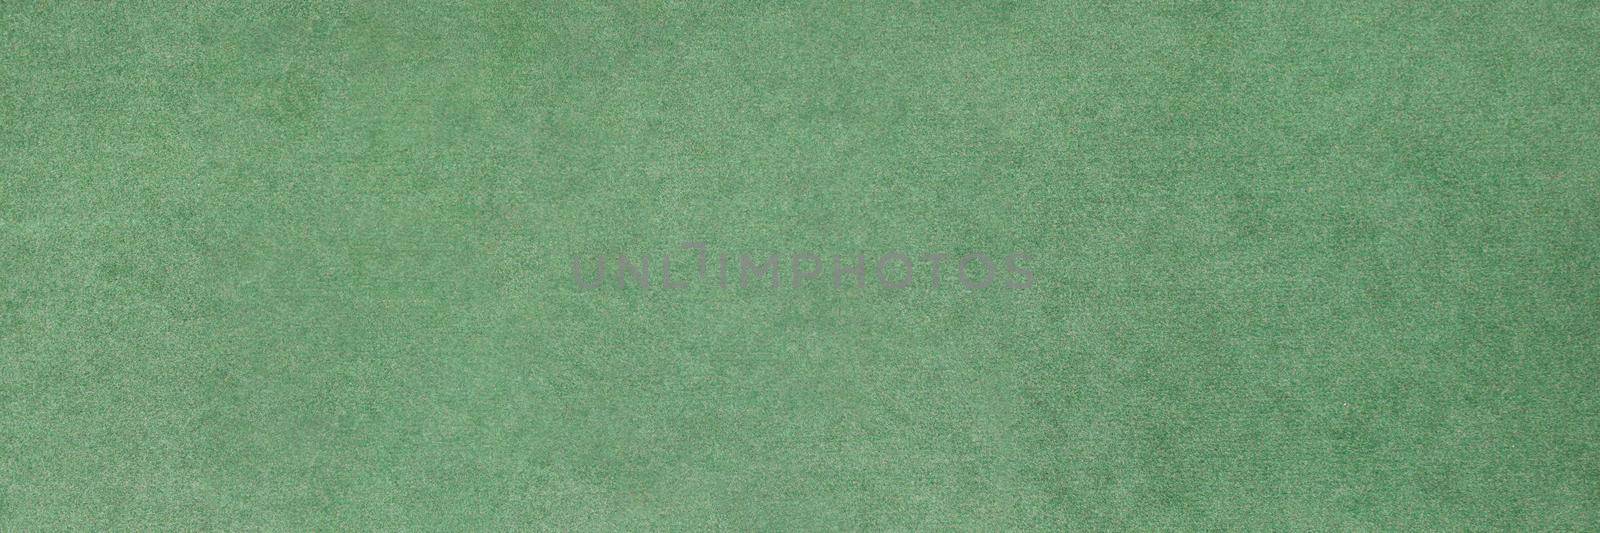 Lawn with green grass closeup background top view. Environmental protection concept